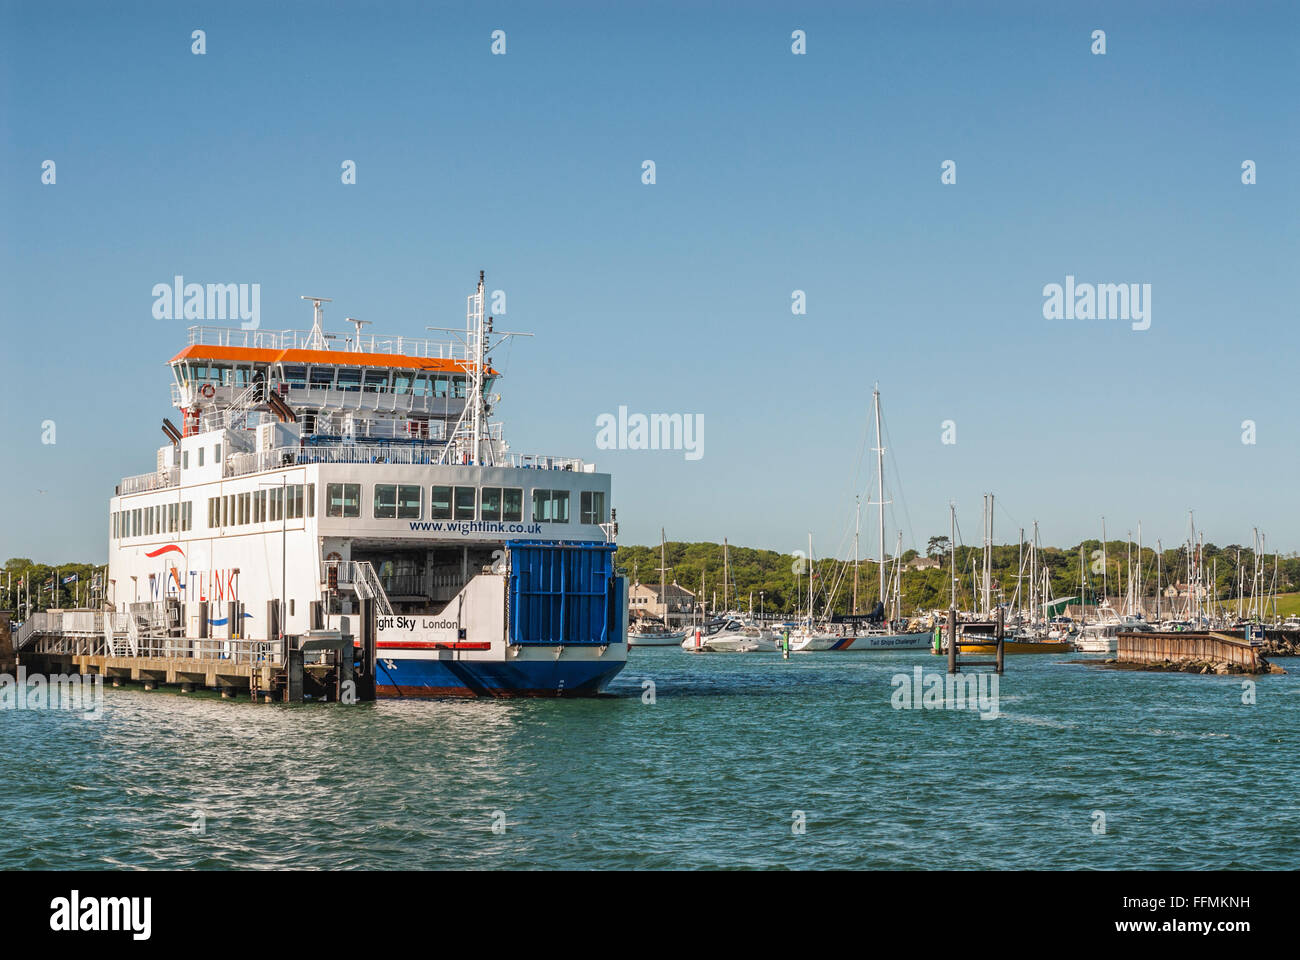 Wightlink Ferry moored at the Marina of Yarmouth, Isle of Wight, England Stock Photo